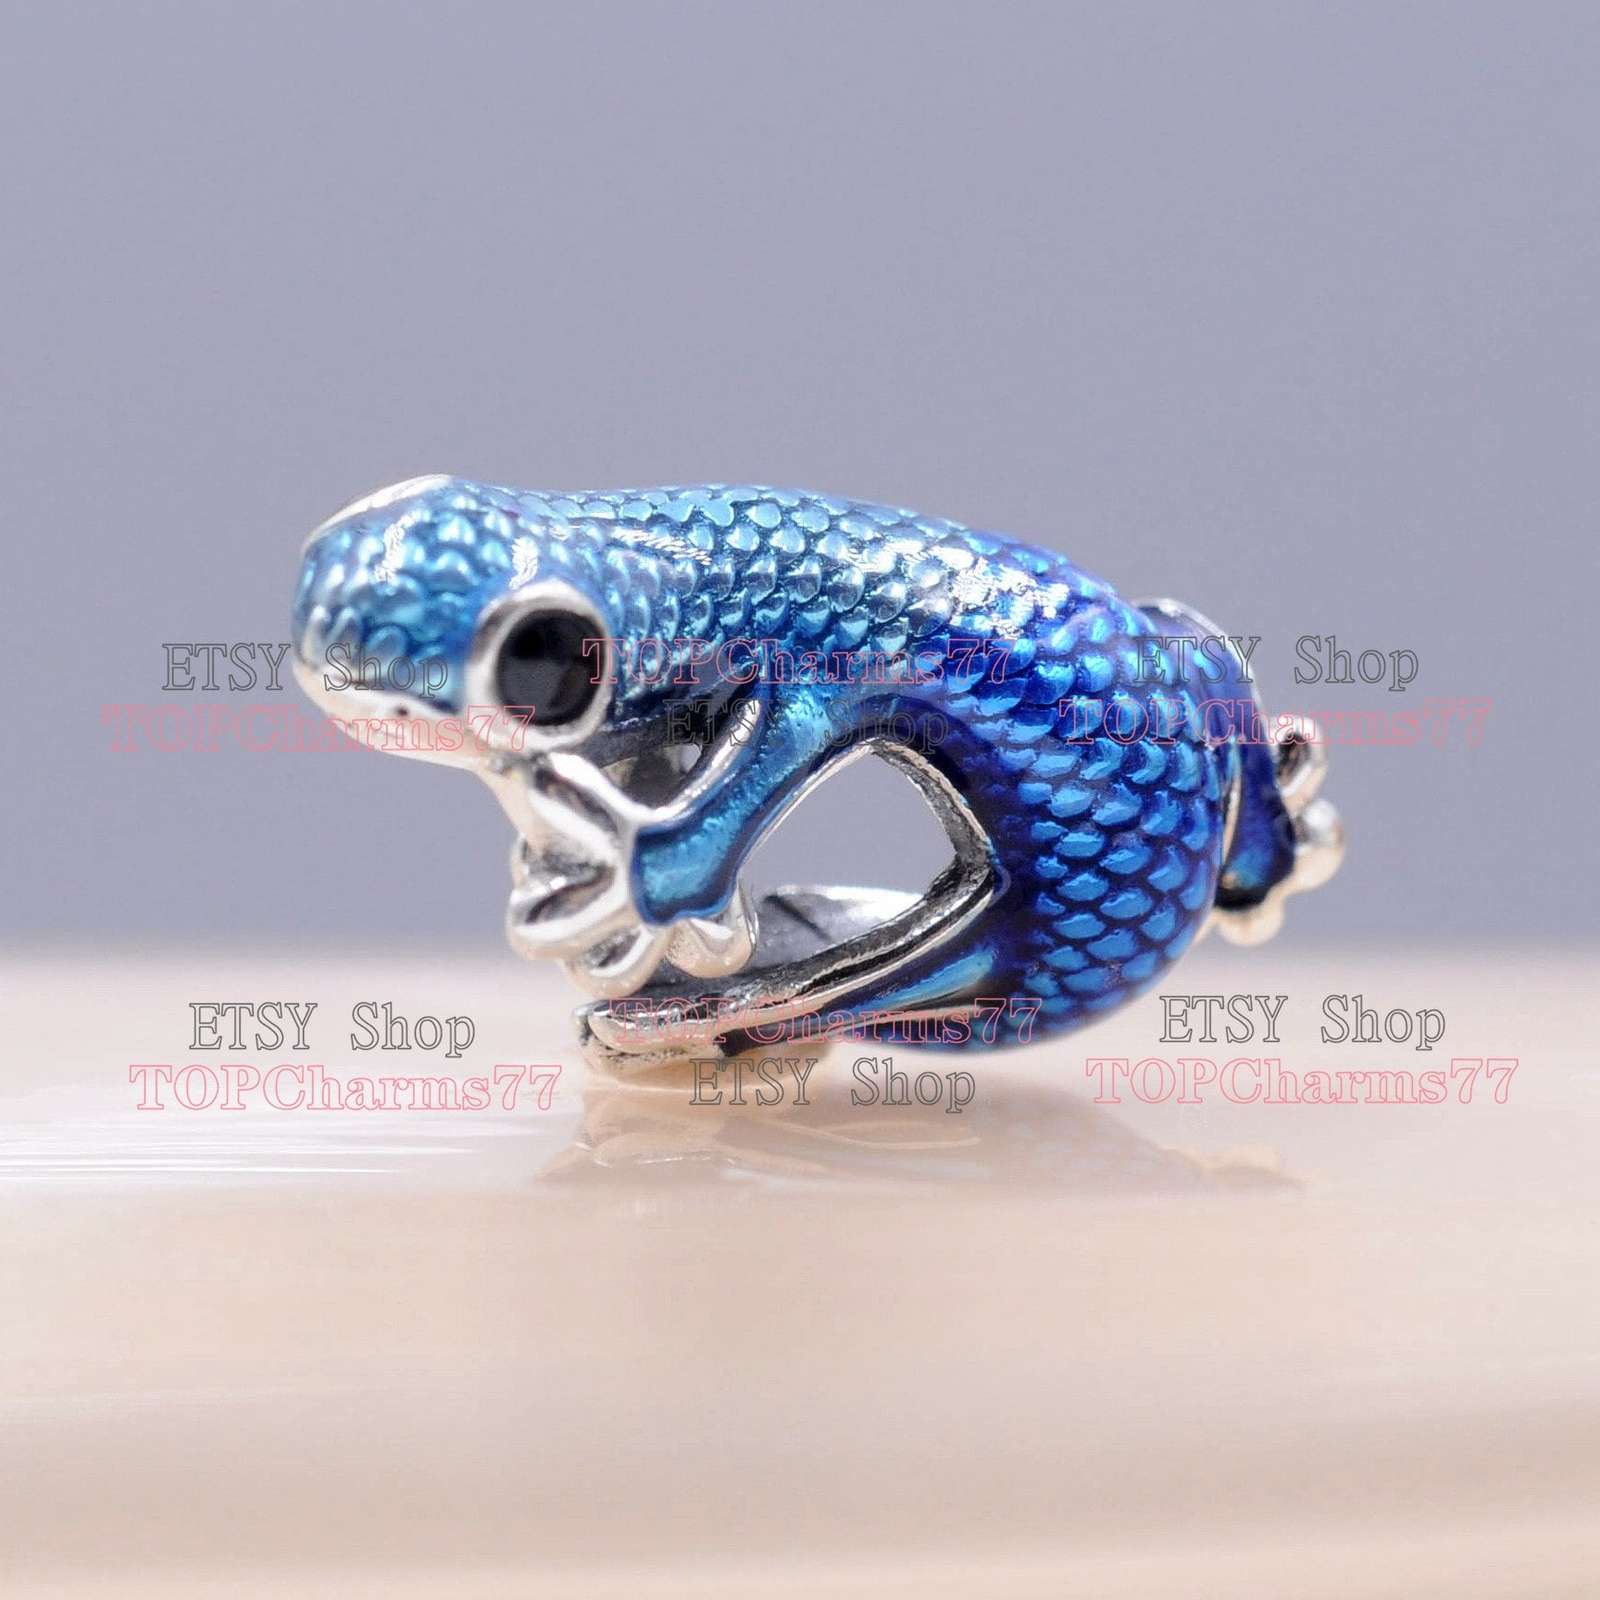 Primary image for 2023 Summer Release 925 Sterling Silver Metallic Blue Gecko Charm 